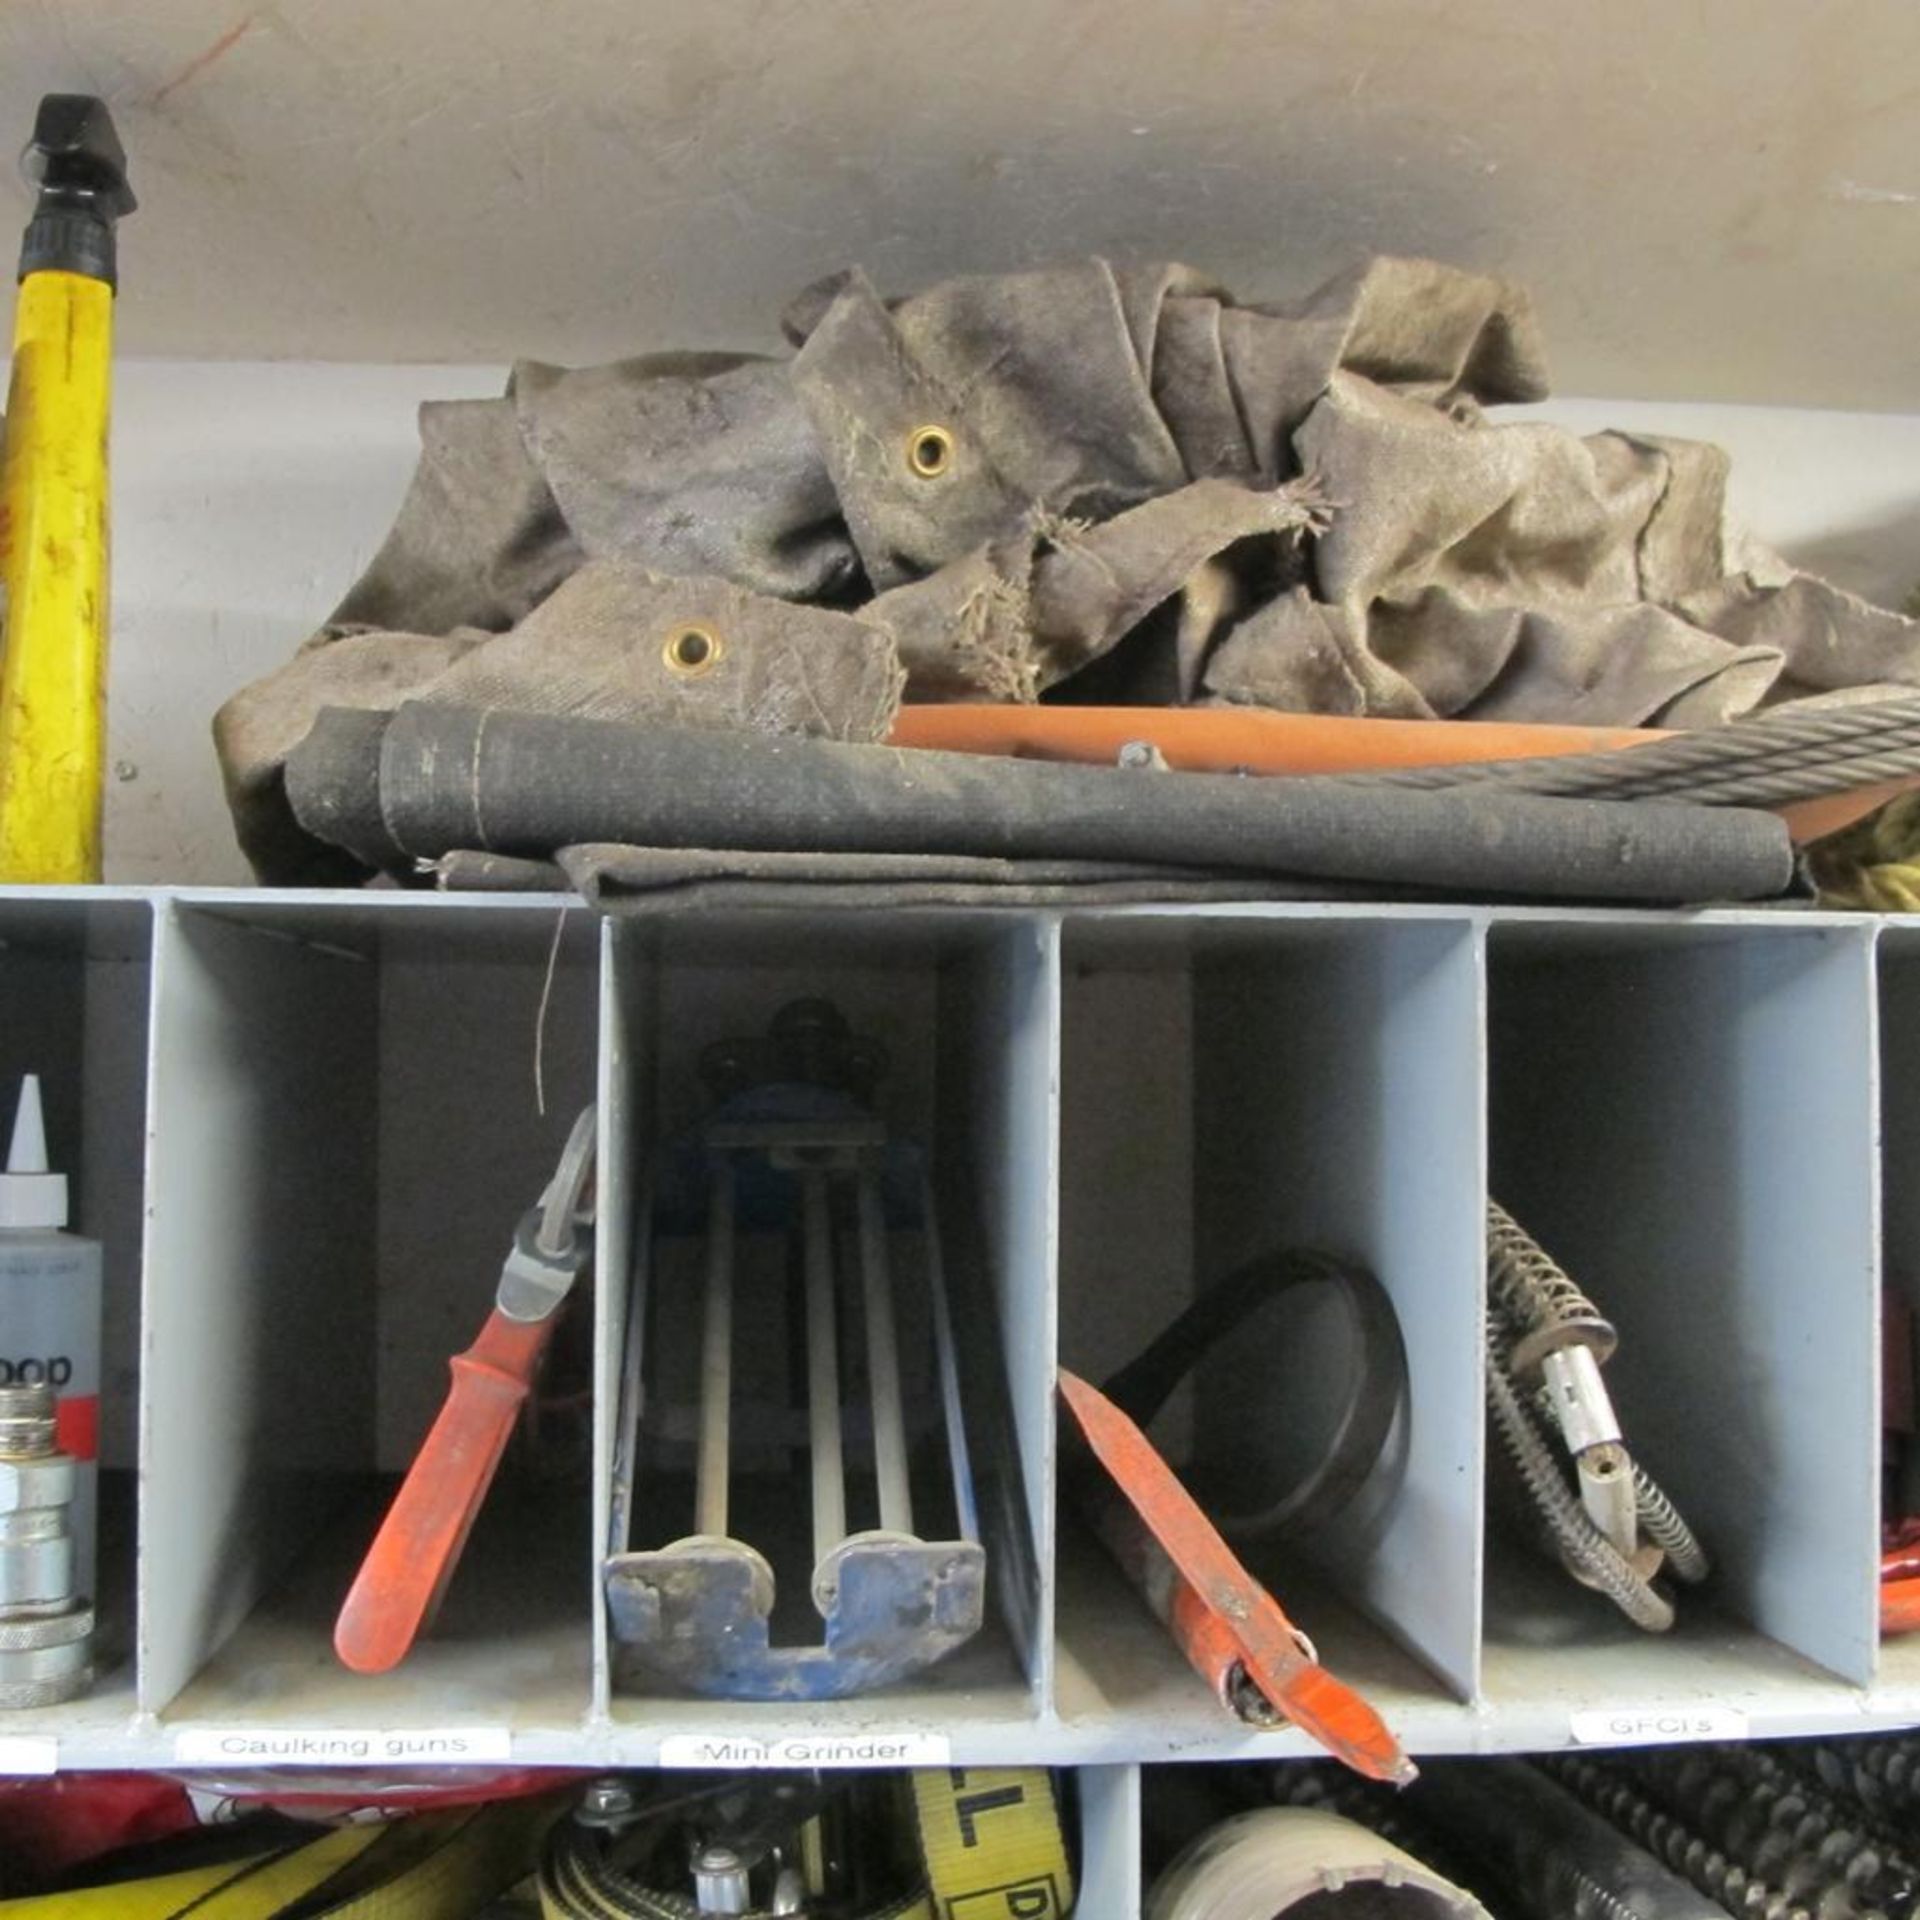 CONTENTS OF 2 UPPER SHELVES IN CAGE (INCL STRAPS, HILTI HDM 500 DISPENSERS, TOOL BOX, ROPES, FIRE BL - Image 3 of 6